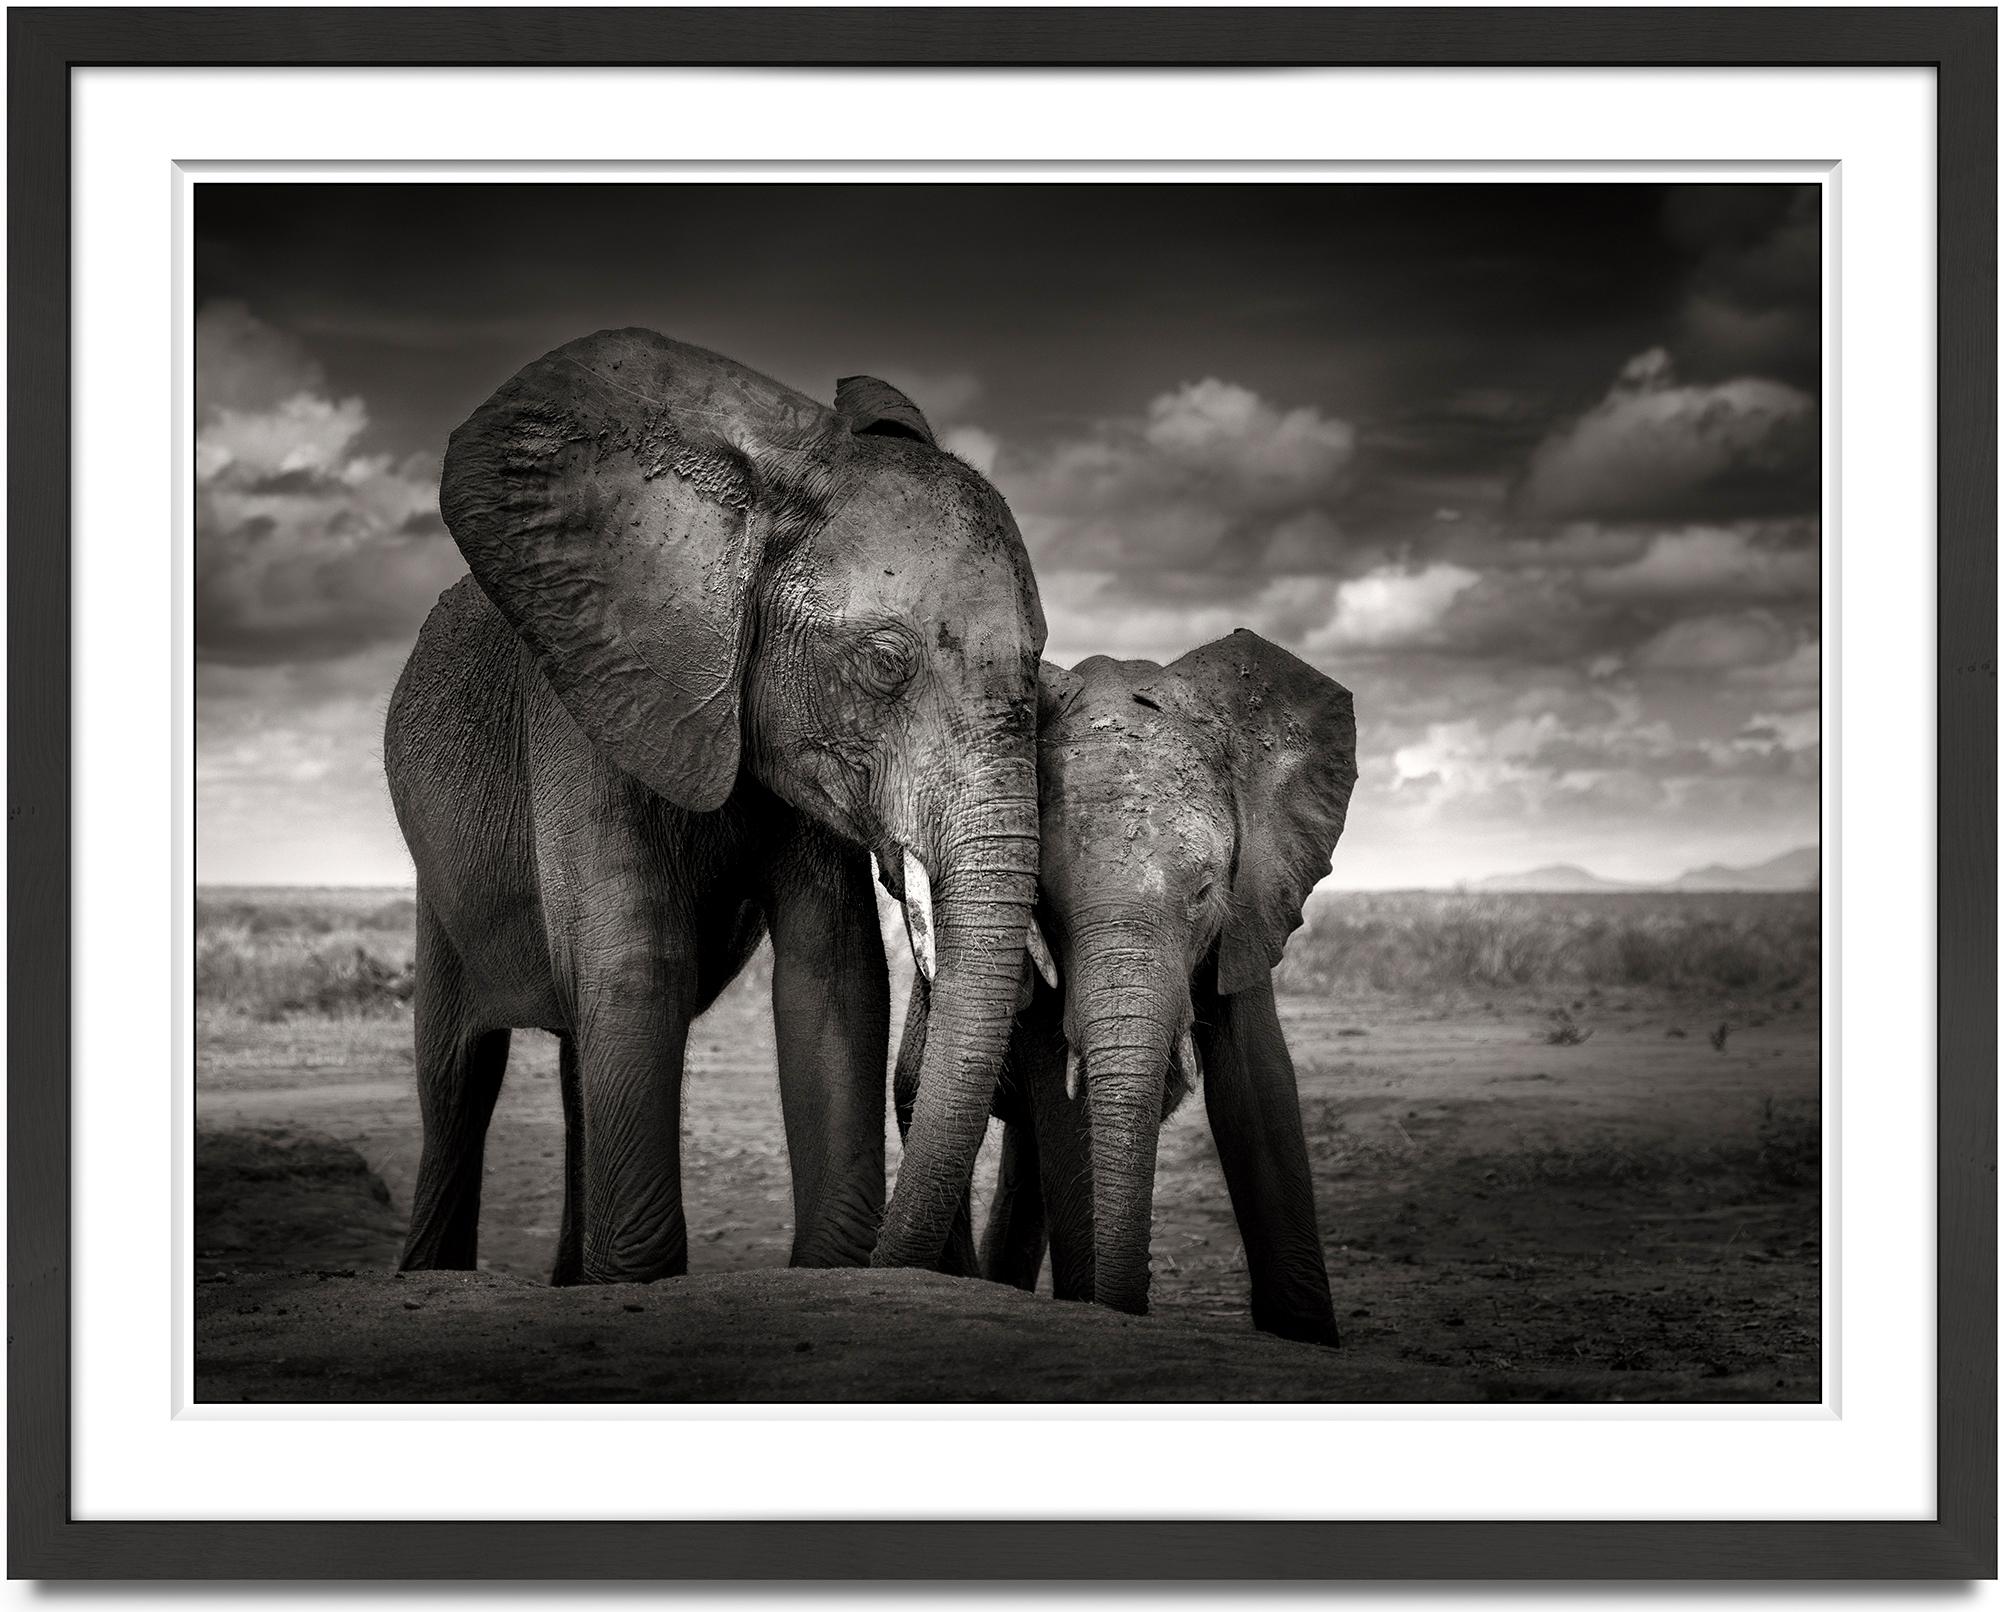 Soulmates, Elephant, animal, wildlife, black and white photography, africa - Photograph by Joachim Schmeisser